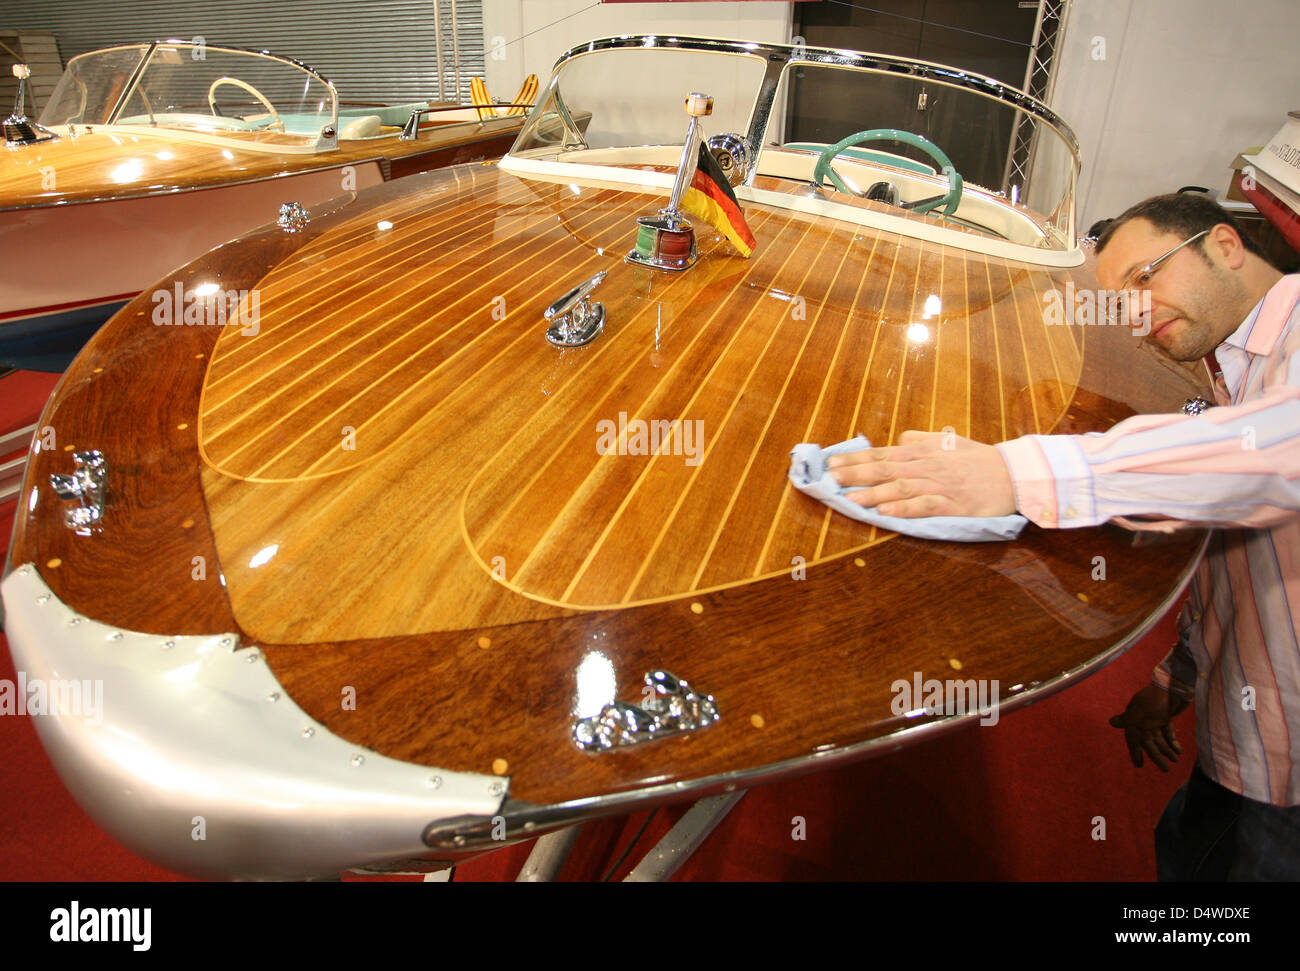 A man polishes a boat at 'Boat and Fun Berlin' trade fair in Berlin, Germany, 24 November 2010. More than 600 exhibitors showcase the their products and services from 24 to 28 November. Photo: Stephanie Pilick Stock Photo